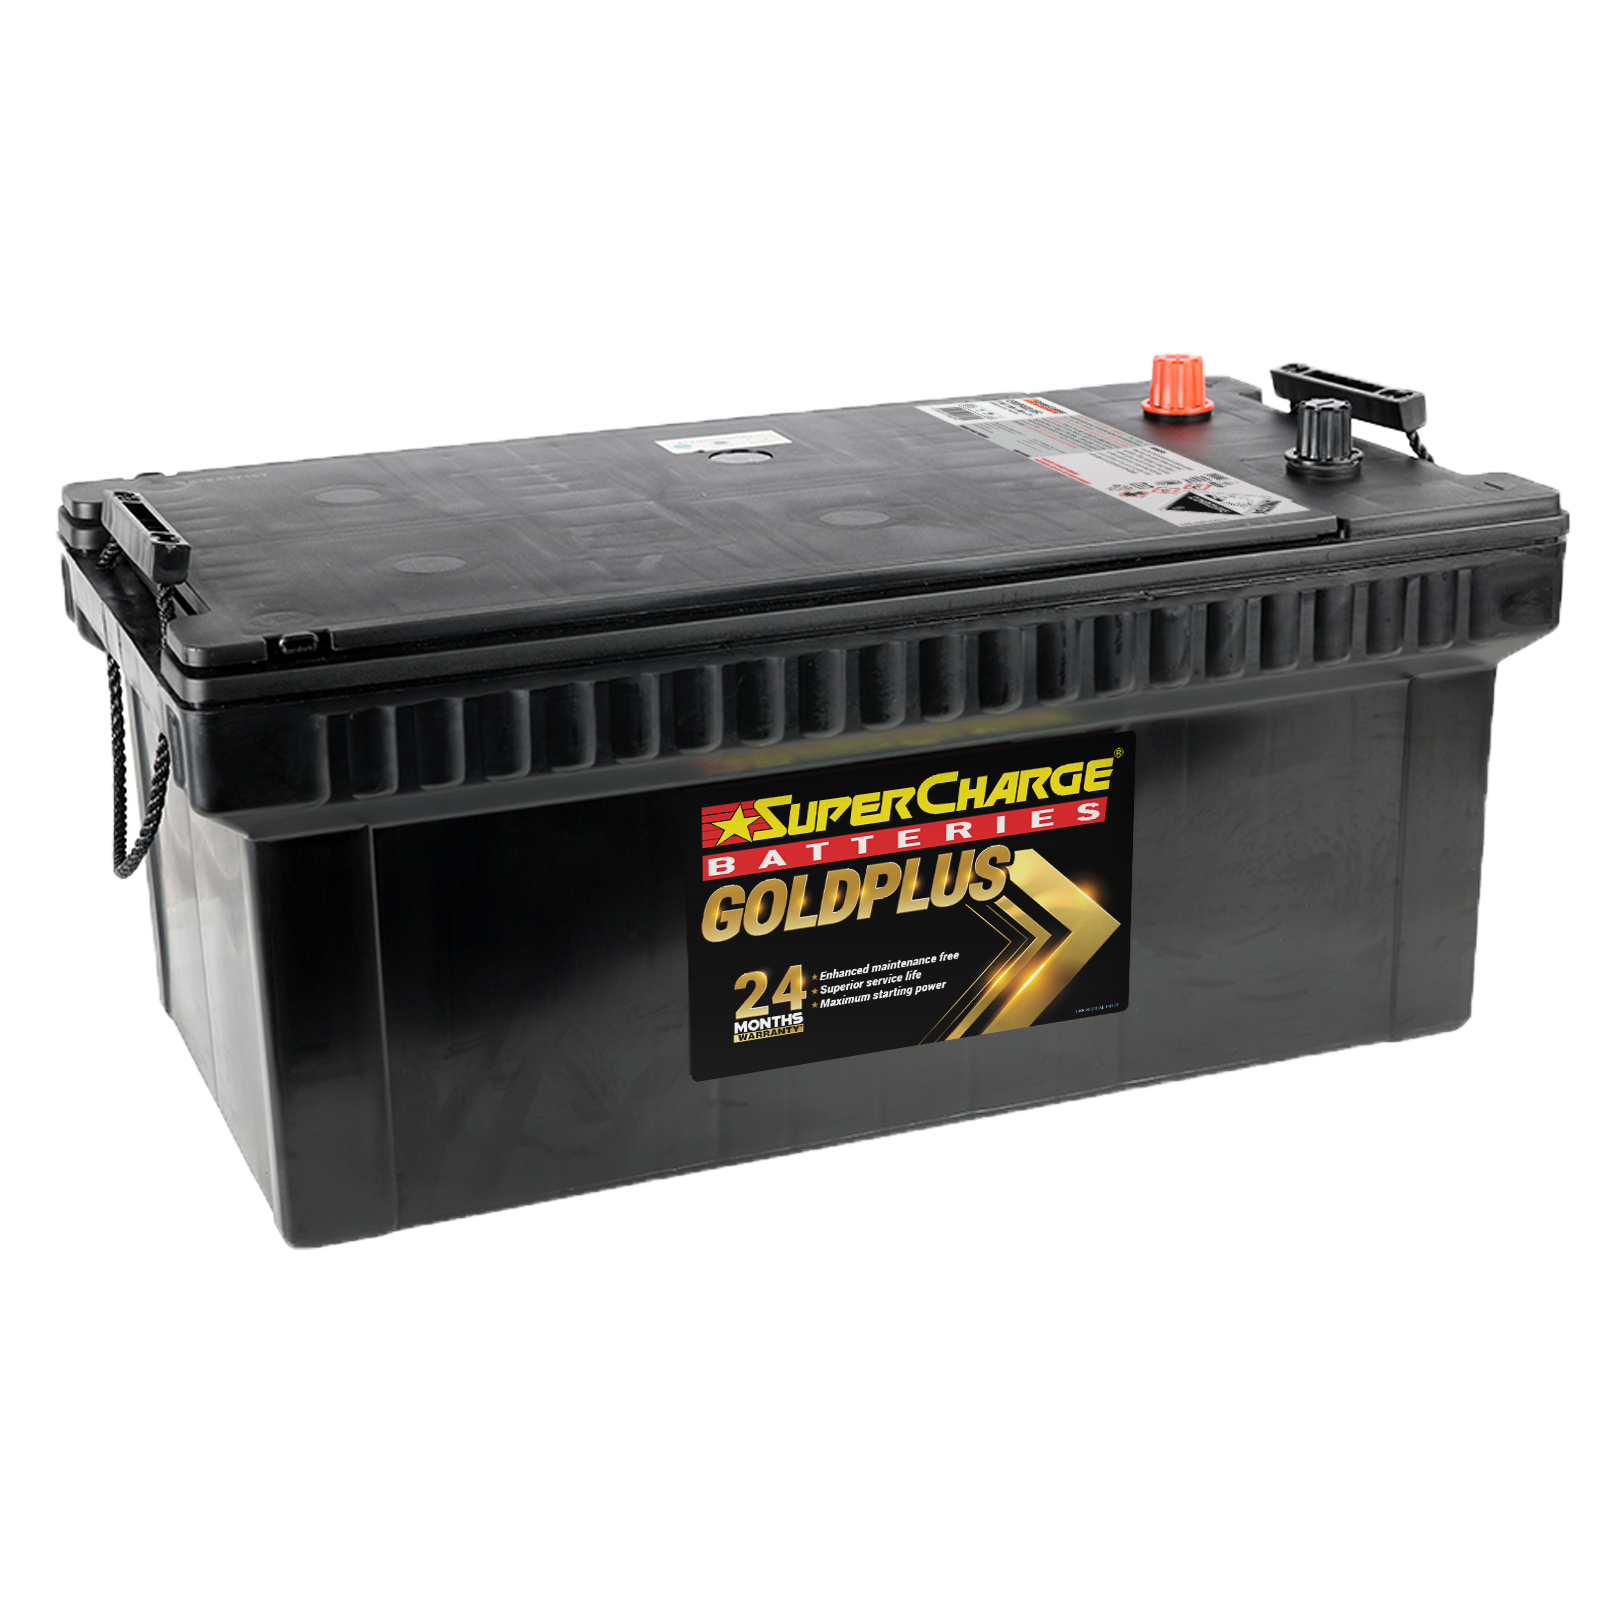 EMFN200R Battery - Reliable And Long-lasting | Supercharge Batteries